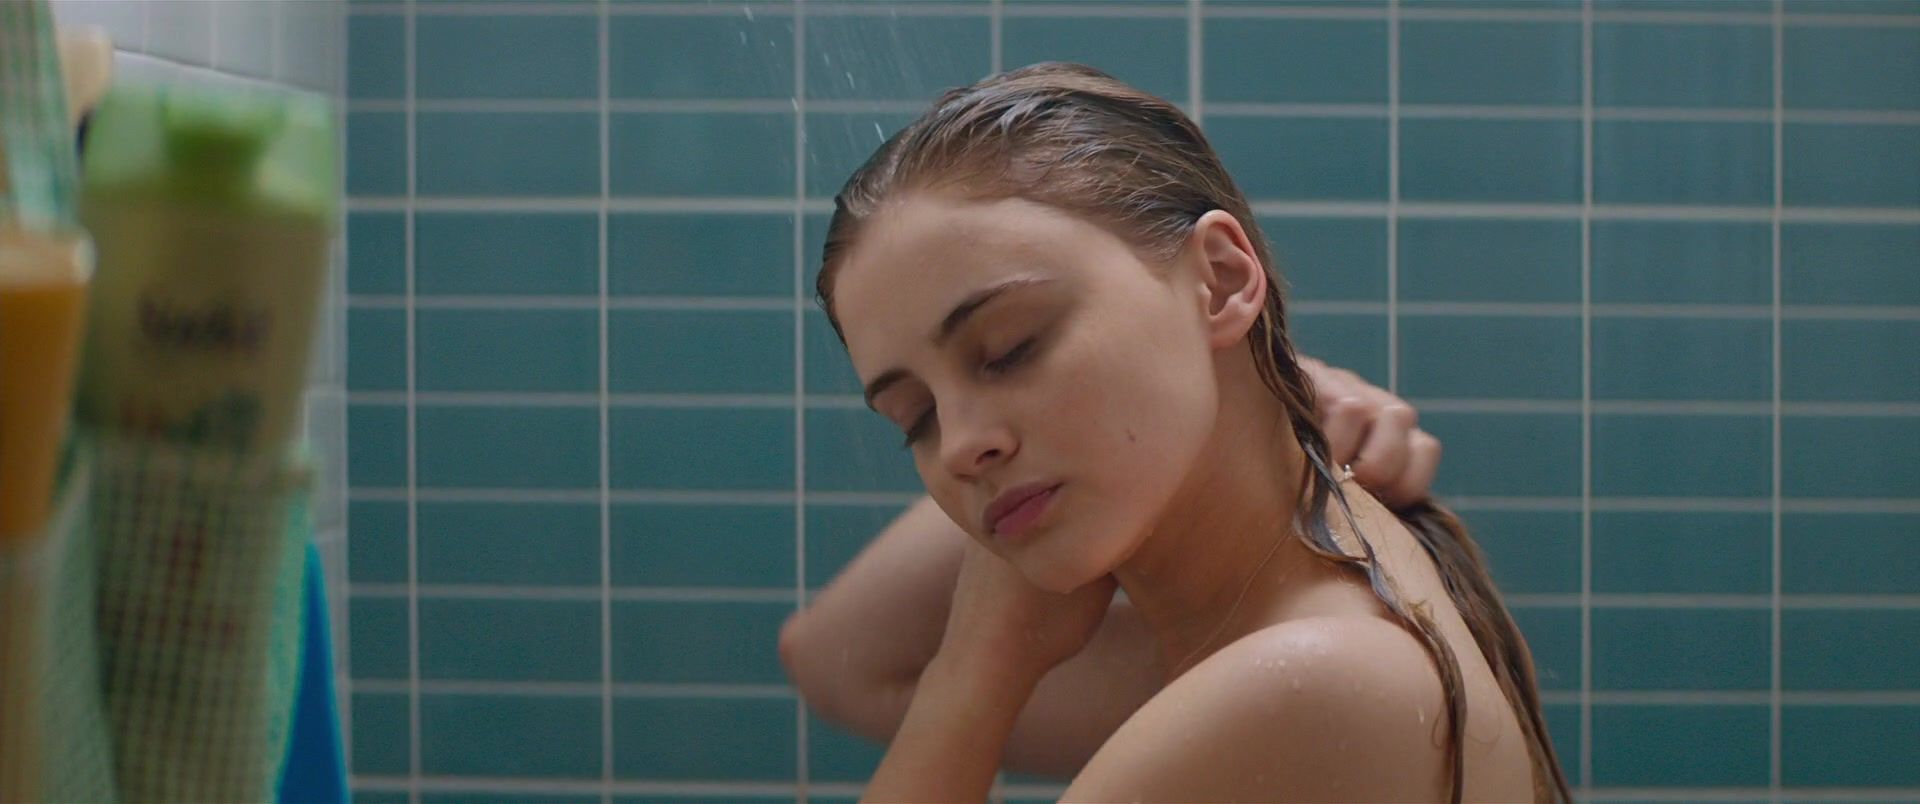 Shemale Sex Josephine Langford nude - After (2019) YOBT